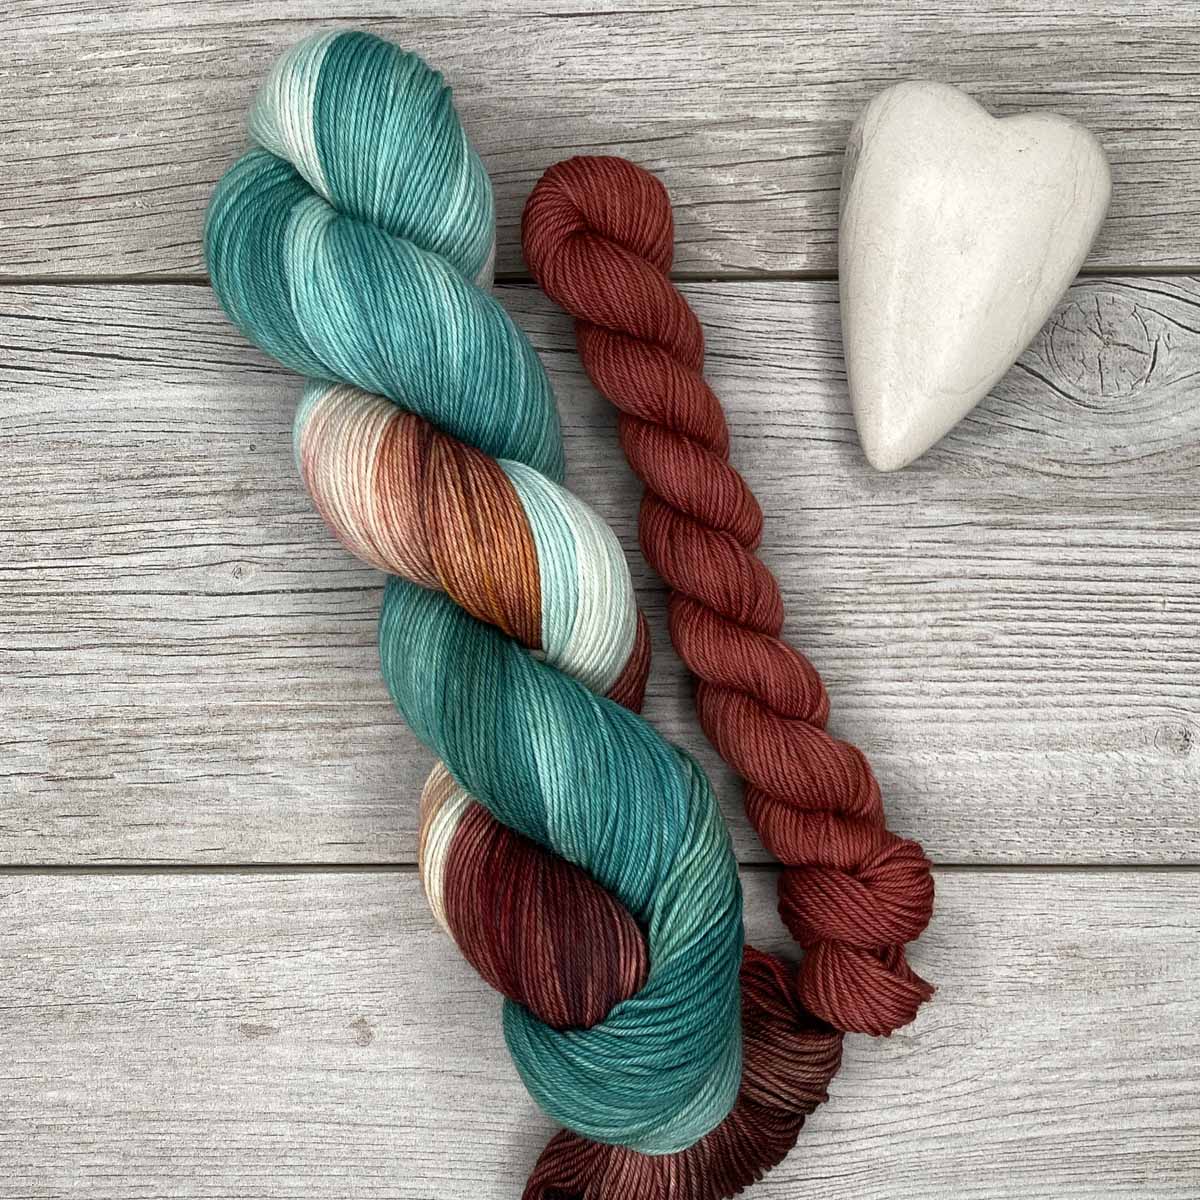 Queen Lucy the Valiant SOCK SET  |  Narnia Inspired  |  SHEEPISHsock  |  fingering weight